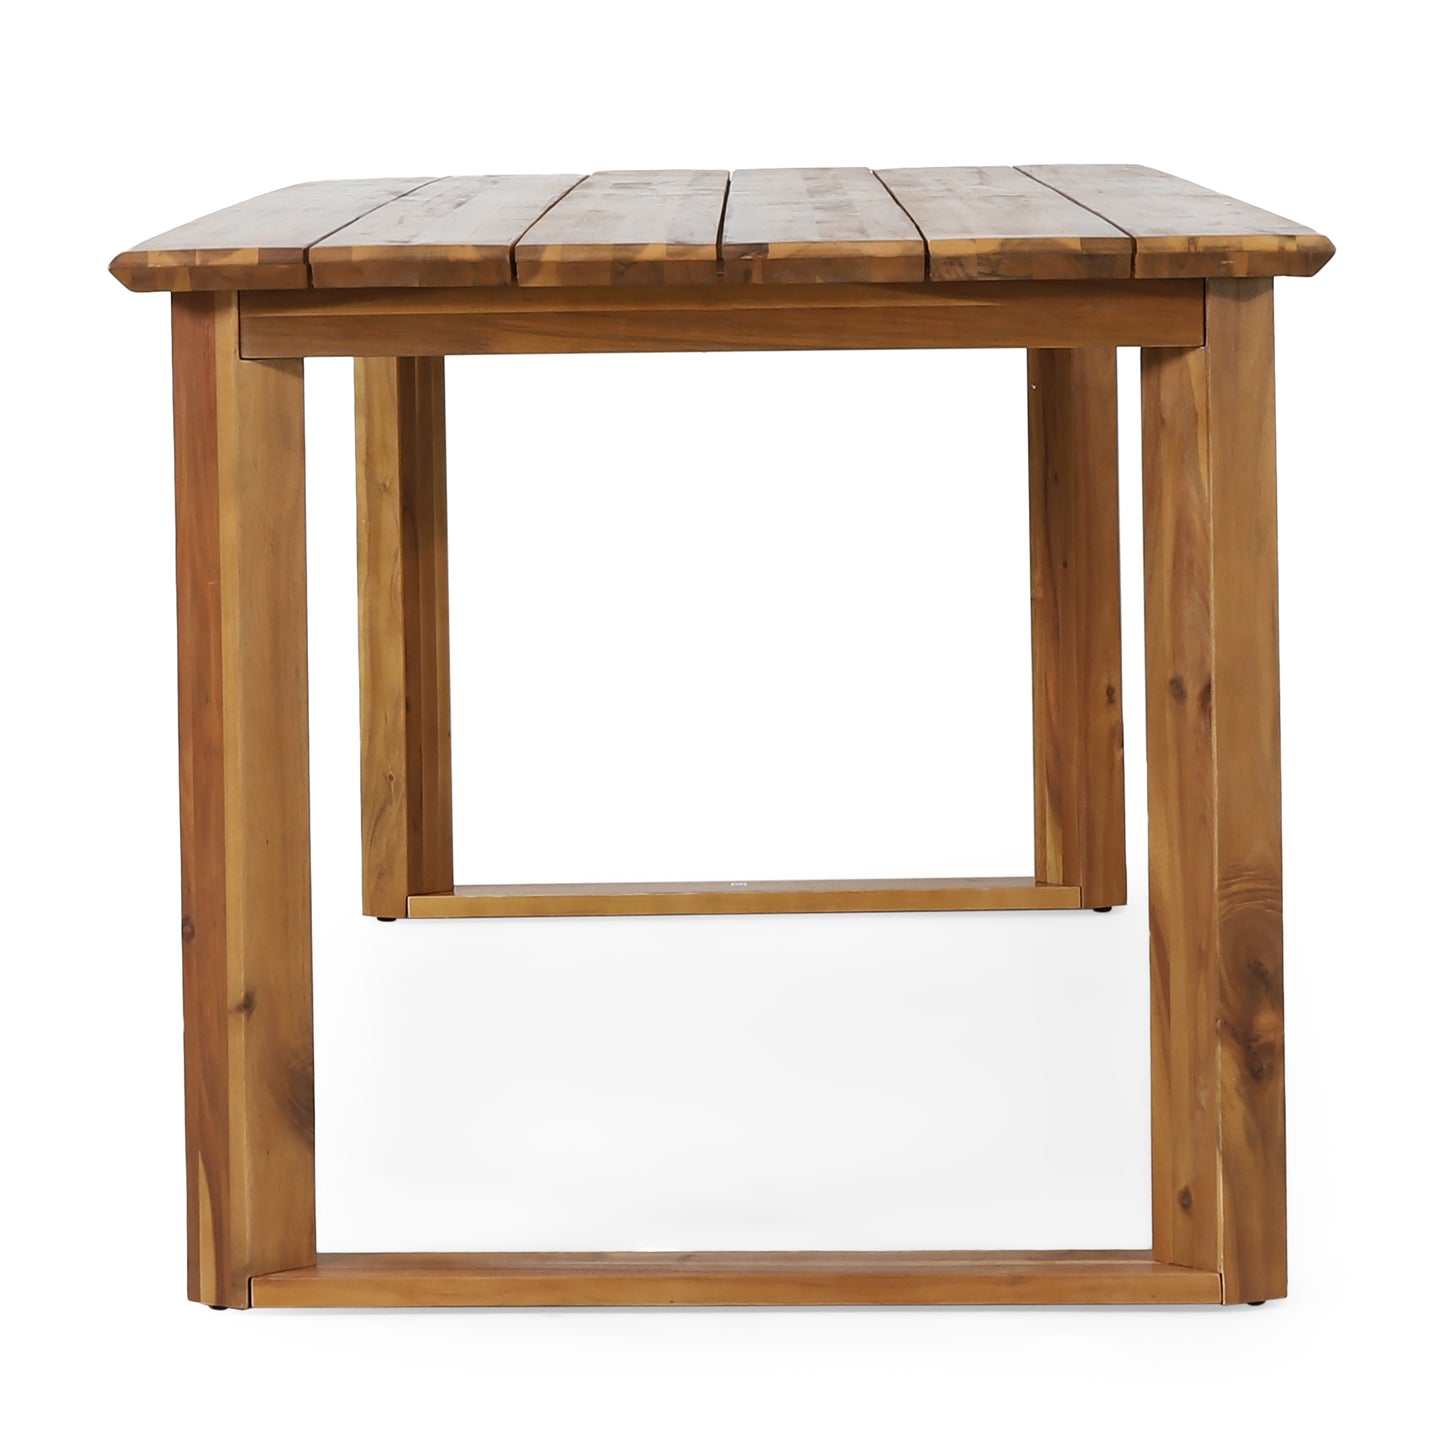 Conifer Outdoor Acacia Wood Dining Table